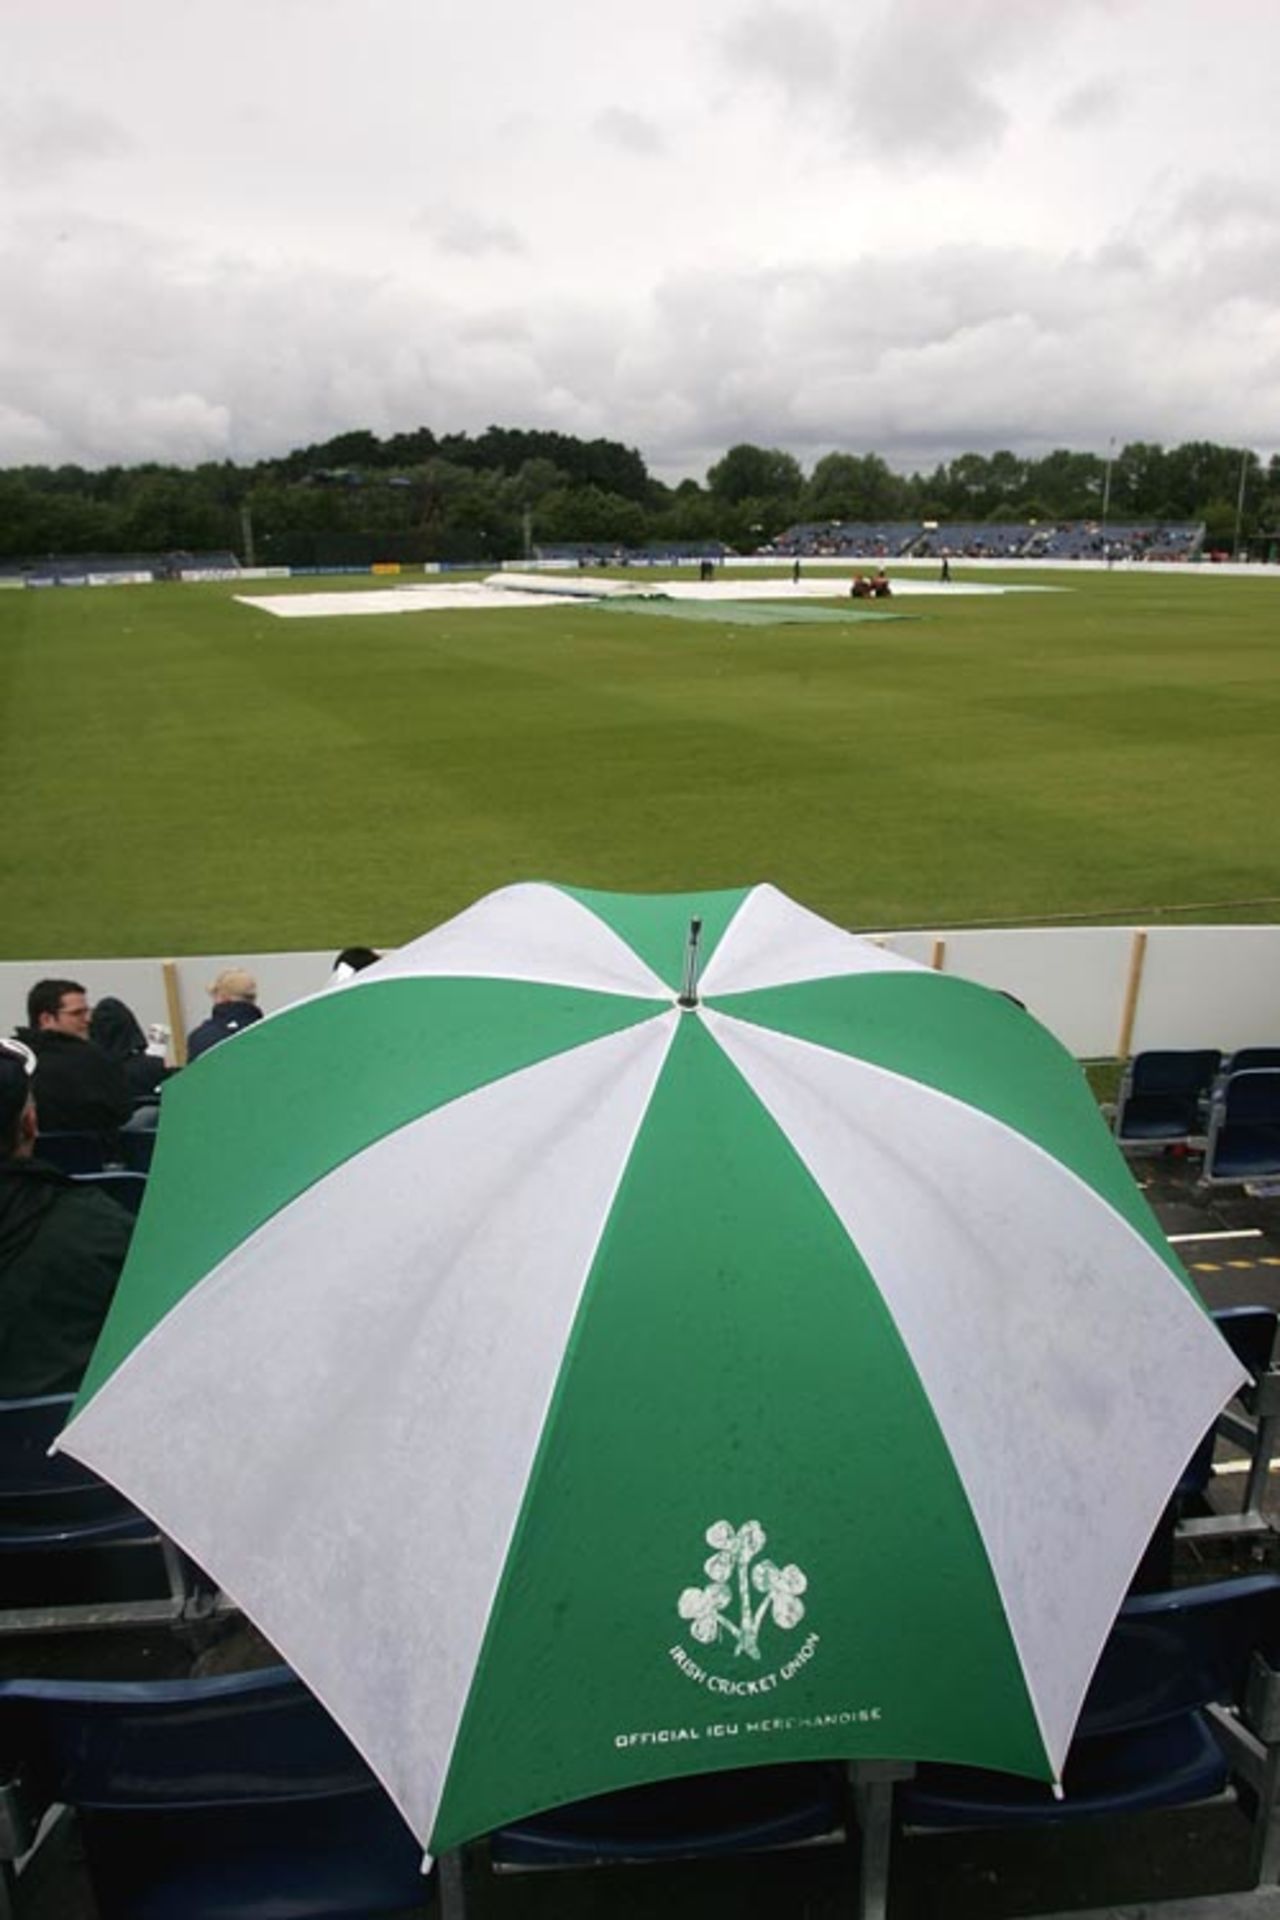 Spectators take shelter under an umbrella as rain delays the start at the Civil Service Cricket Club, Ireland v South Africa, One-off ODI, Belfast, June 24, 2007